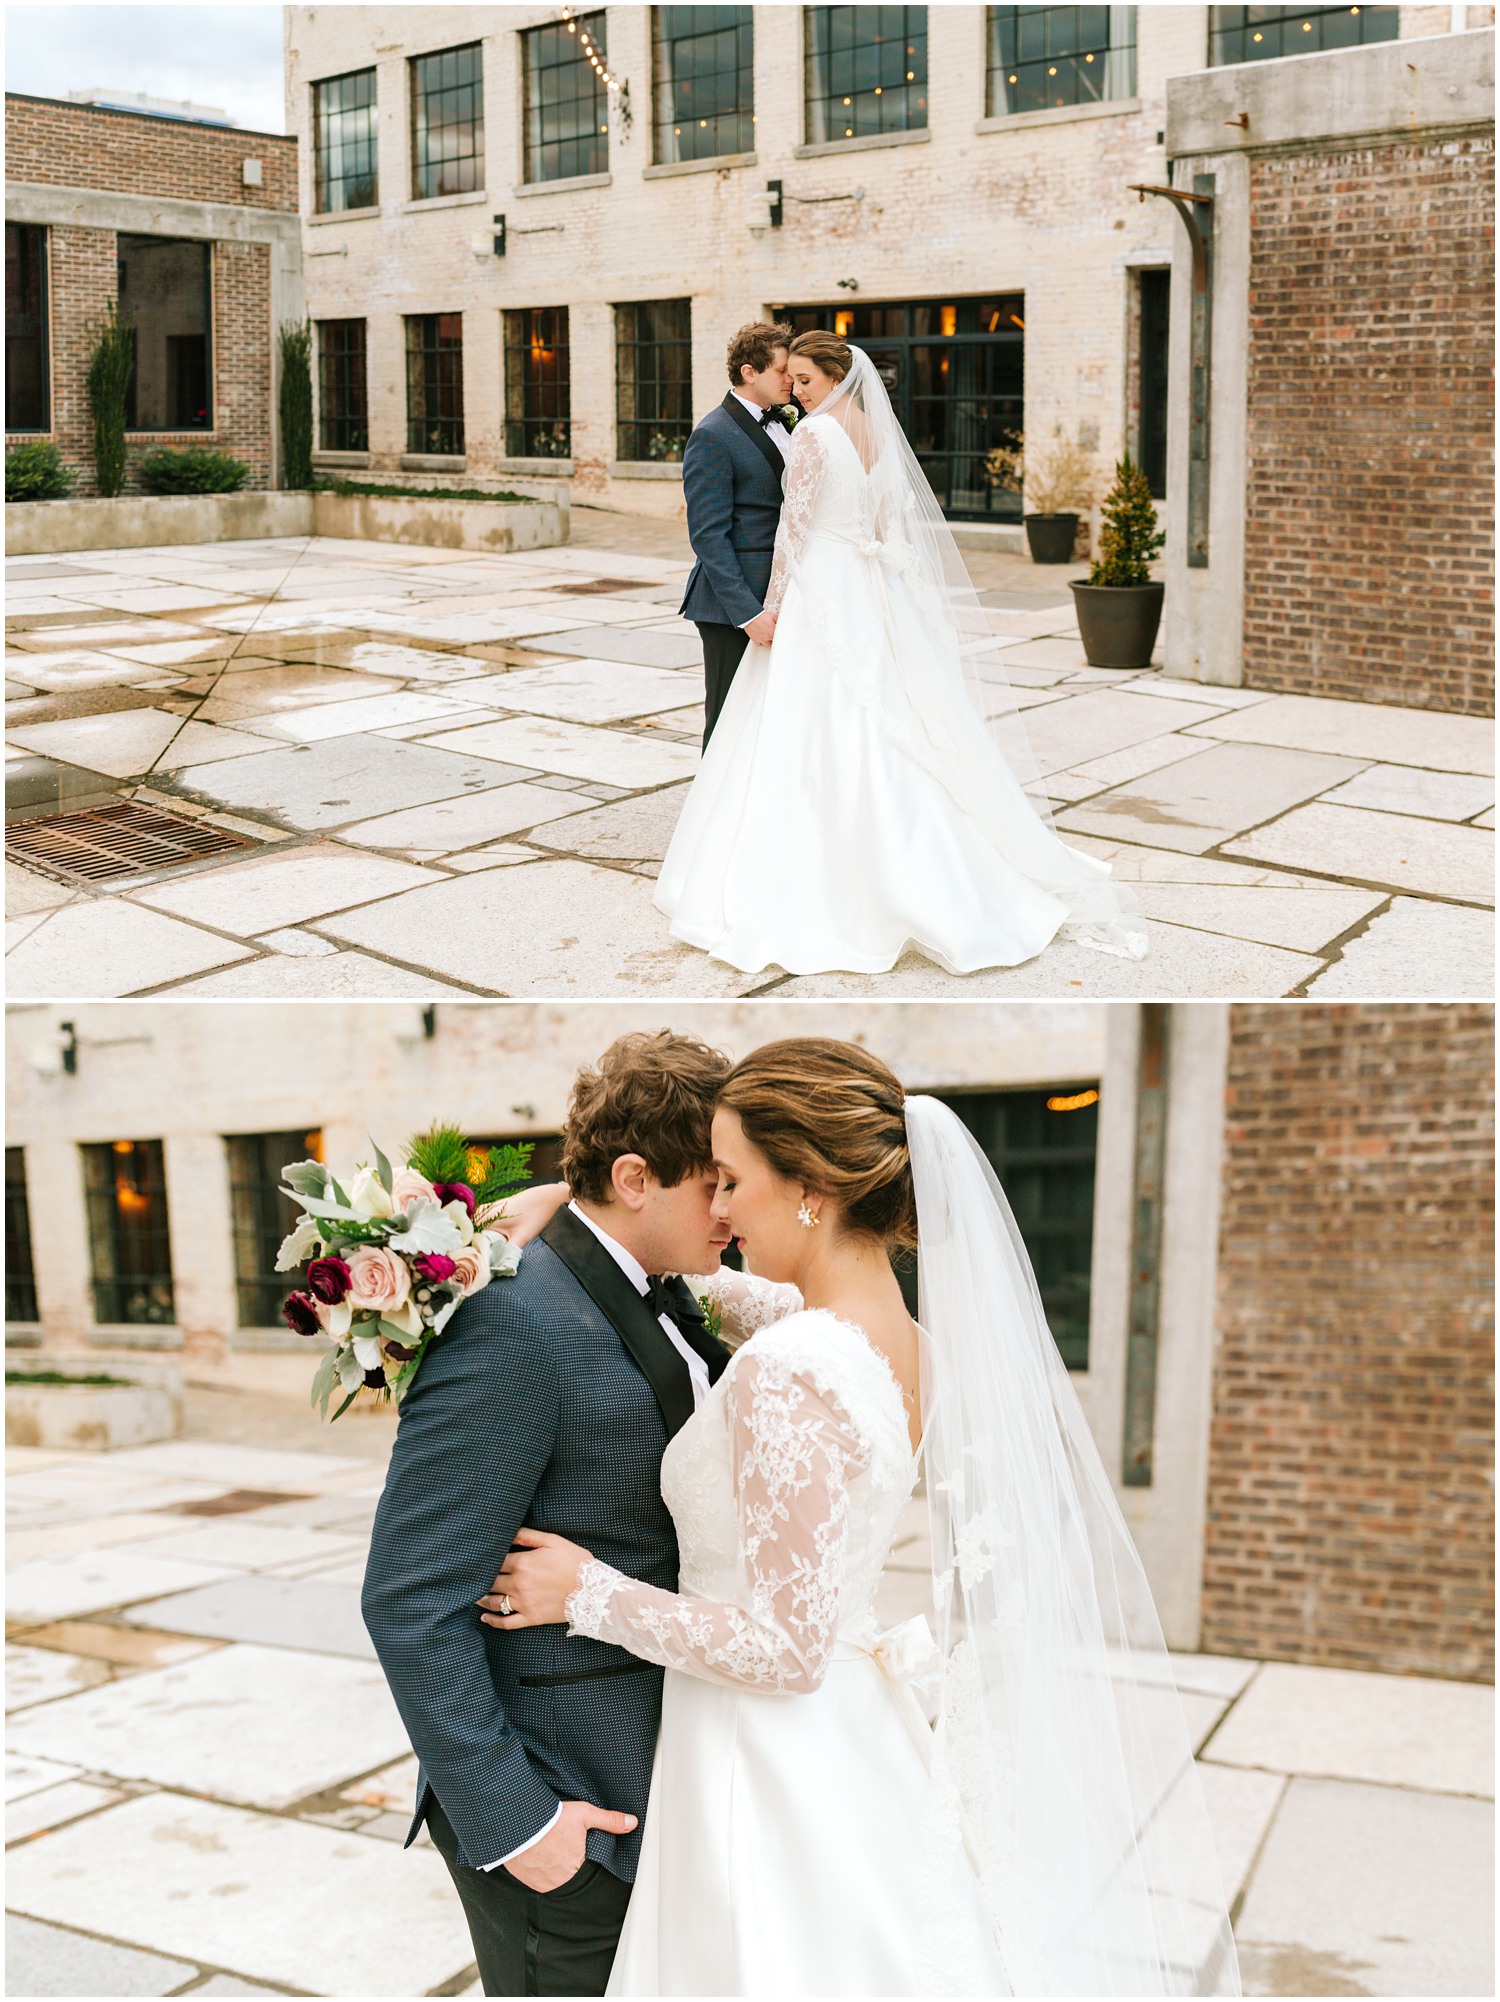 Chelsea Renay Photography photographs bride and groom hugging